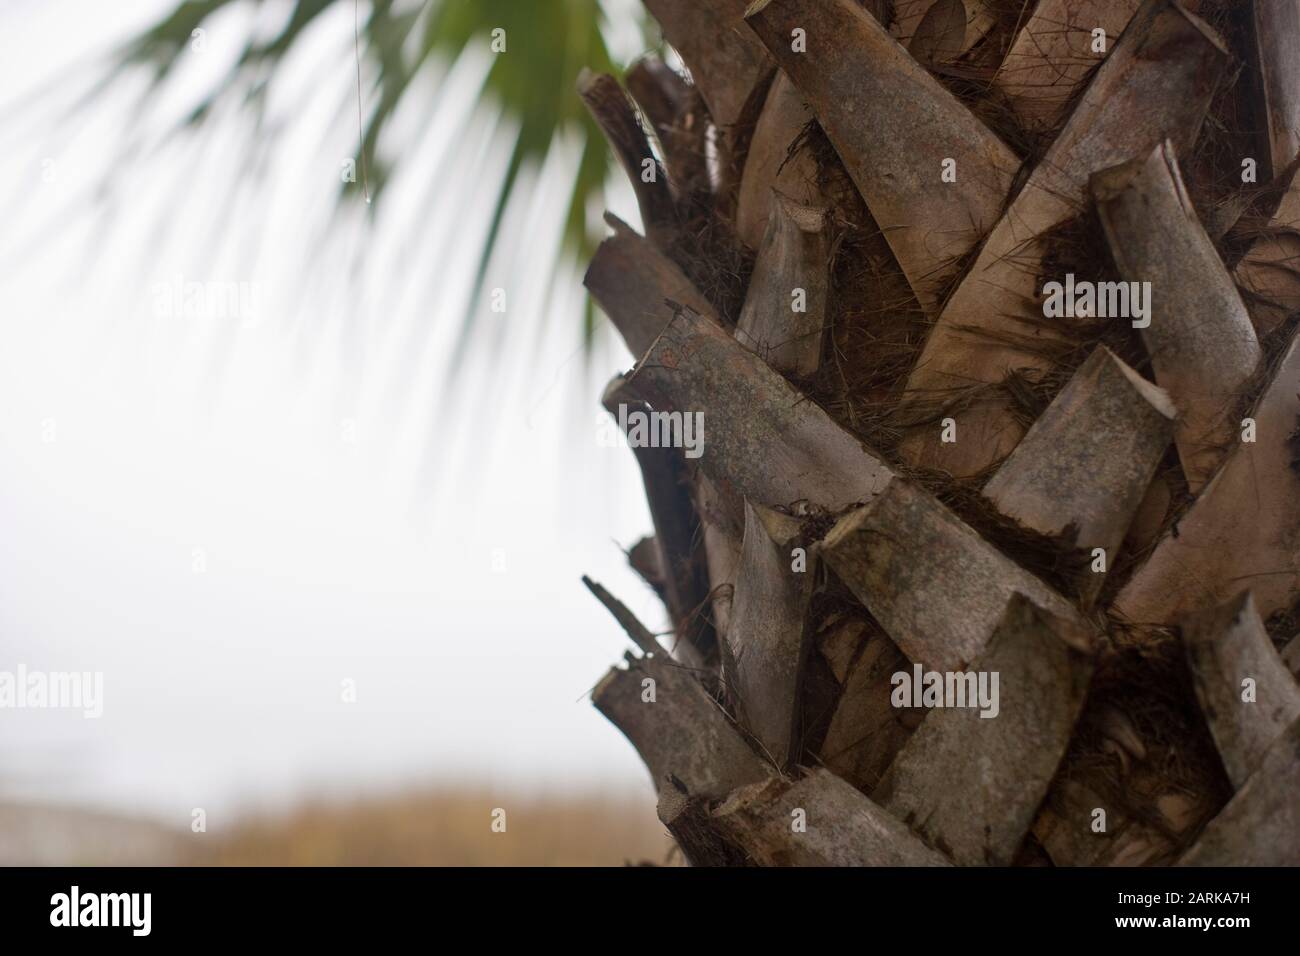 Close-up of a palm tree trunk Stock Photo